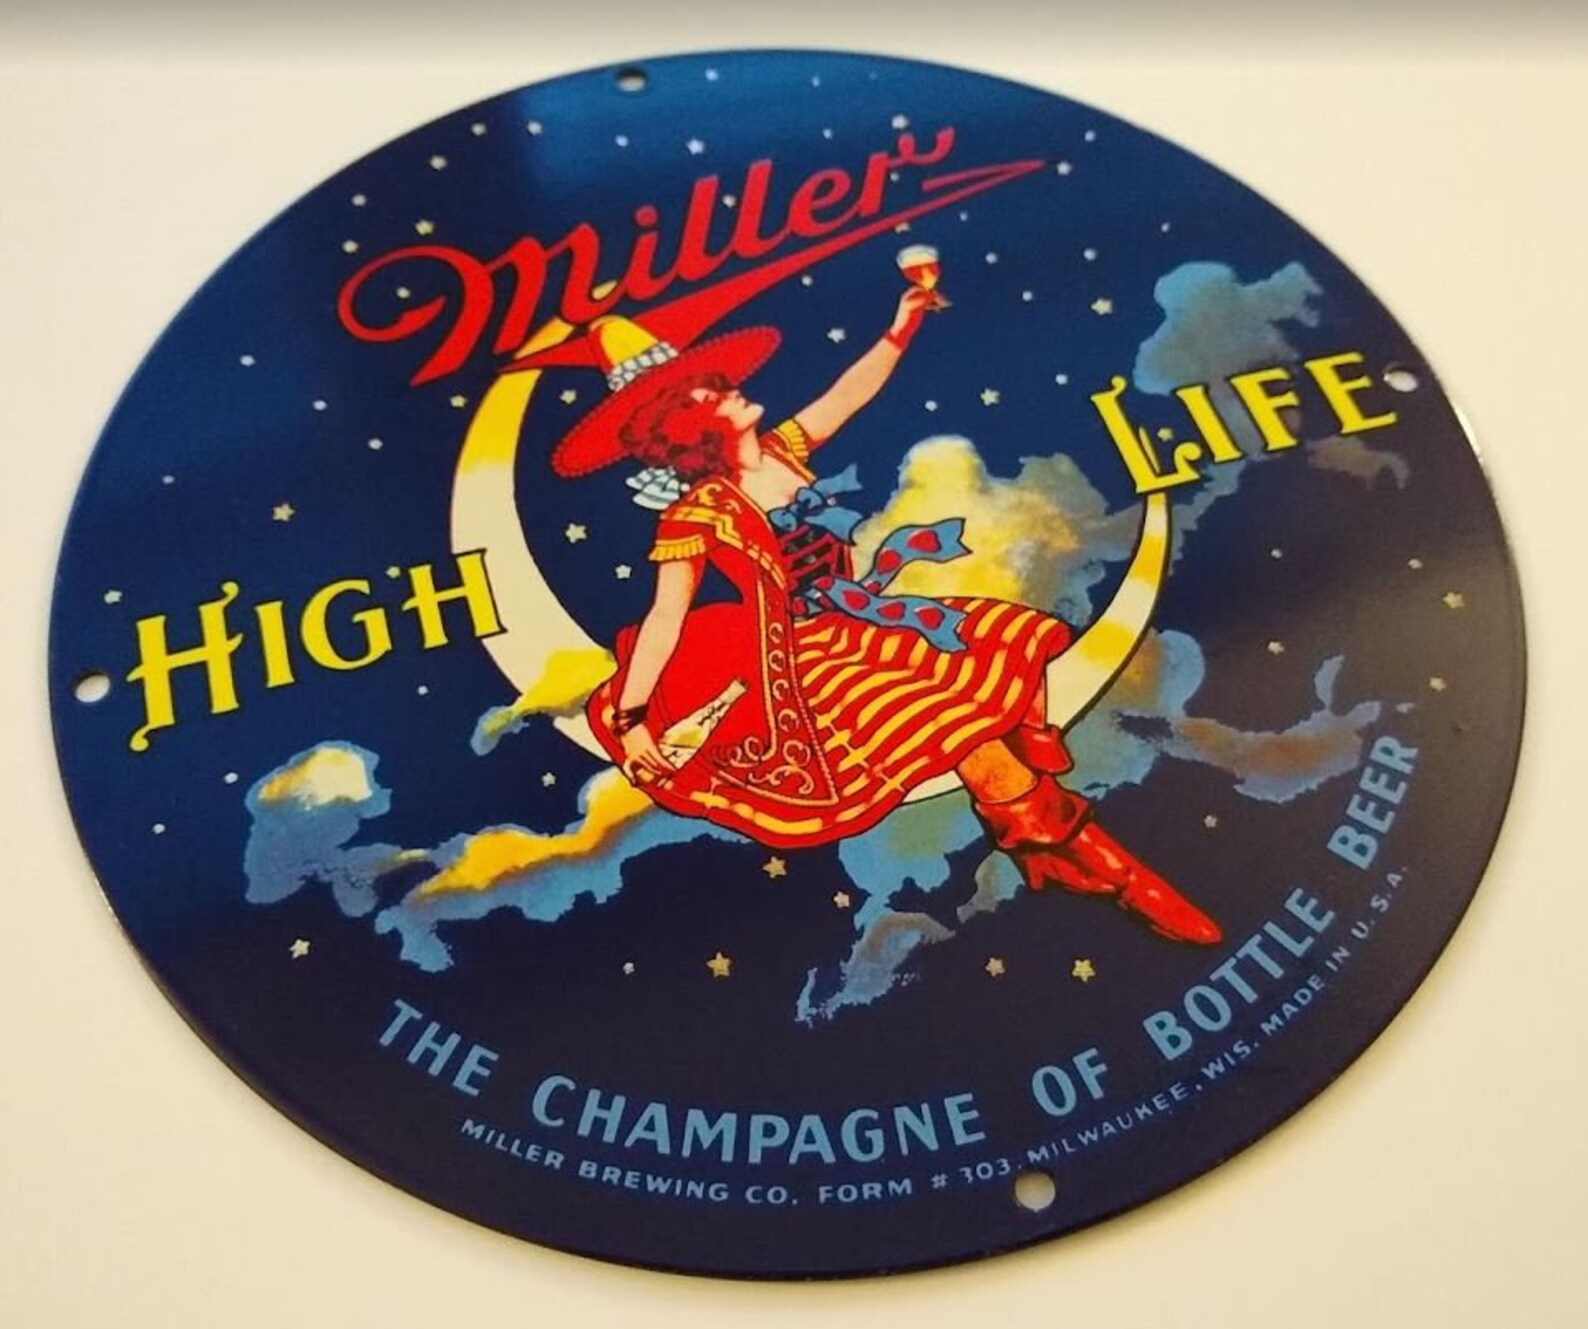 MILLER HIGH Life the Champagne of Bottle Beer.